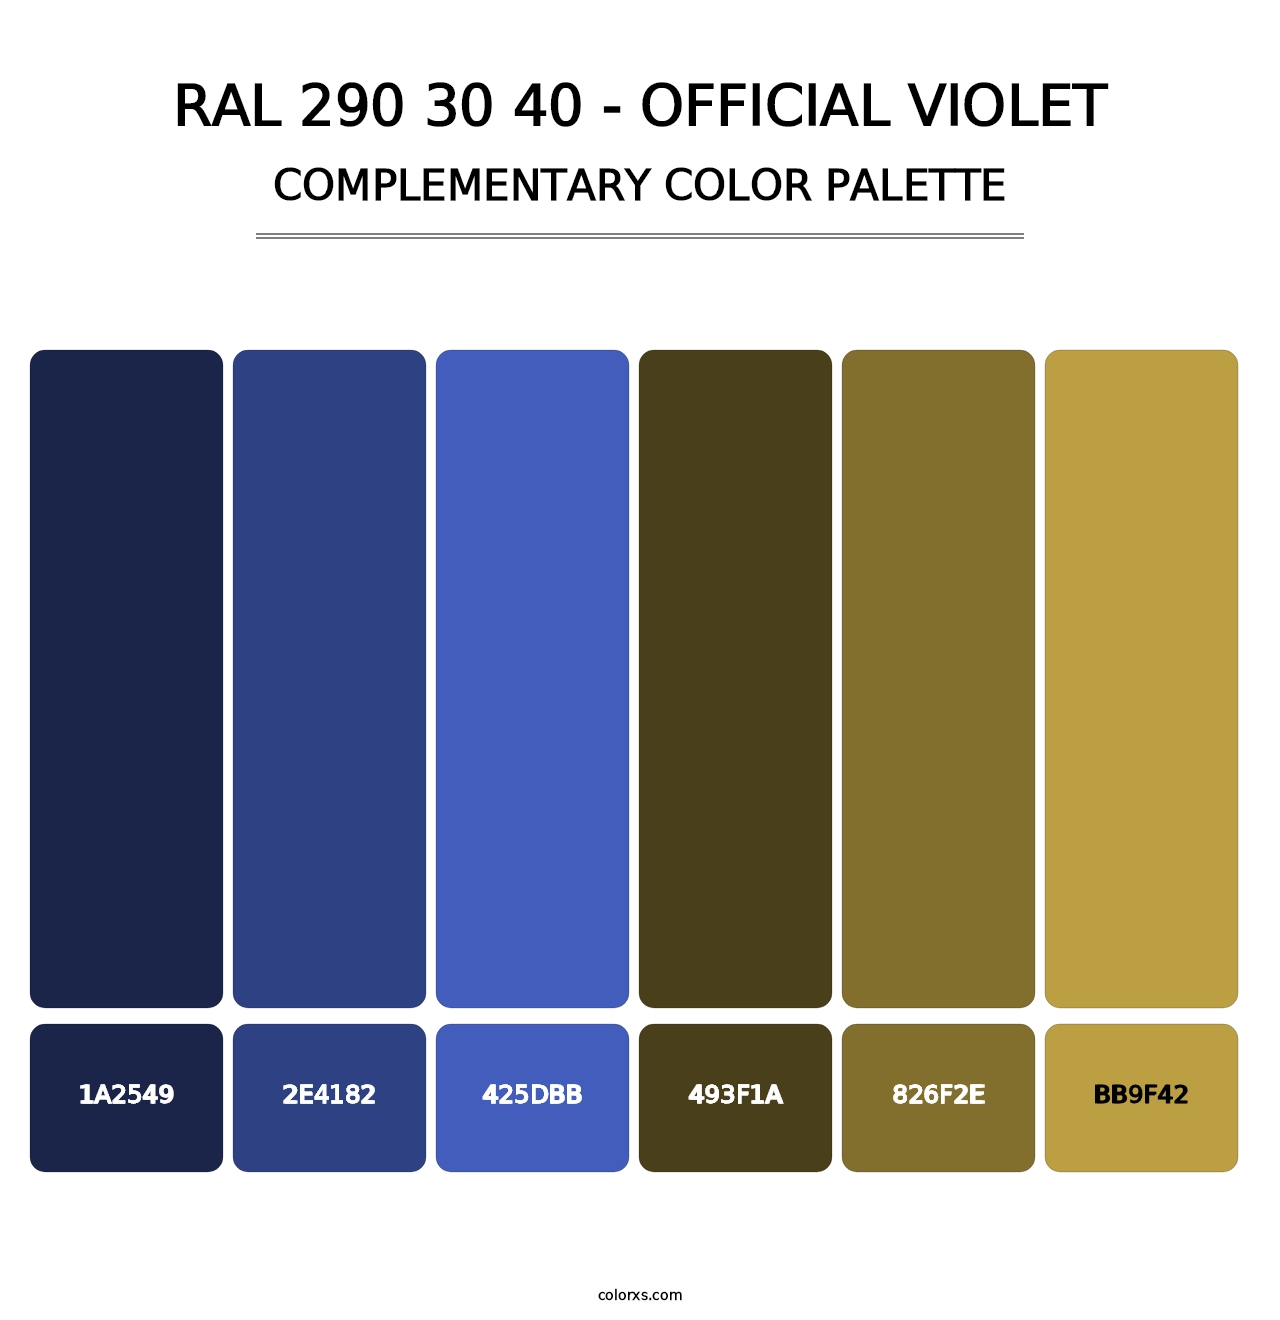 RAL 290 30 40 - Official Violet - Complementary Color Palette